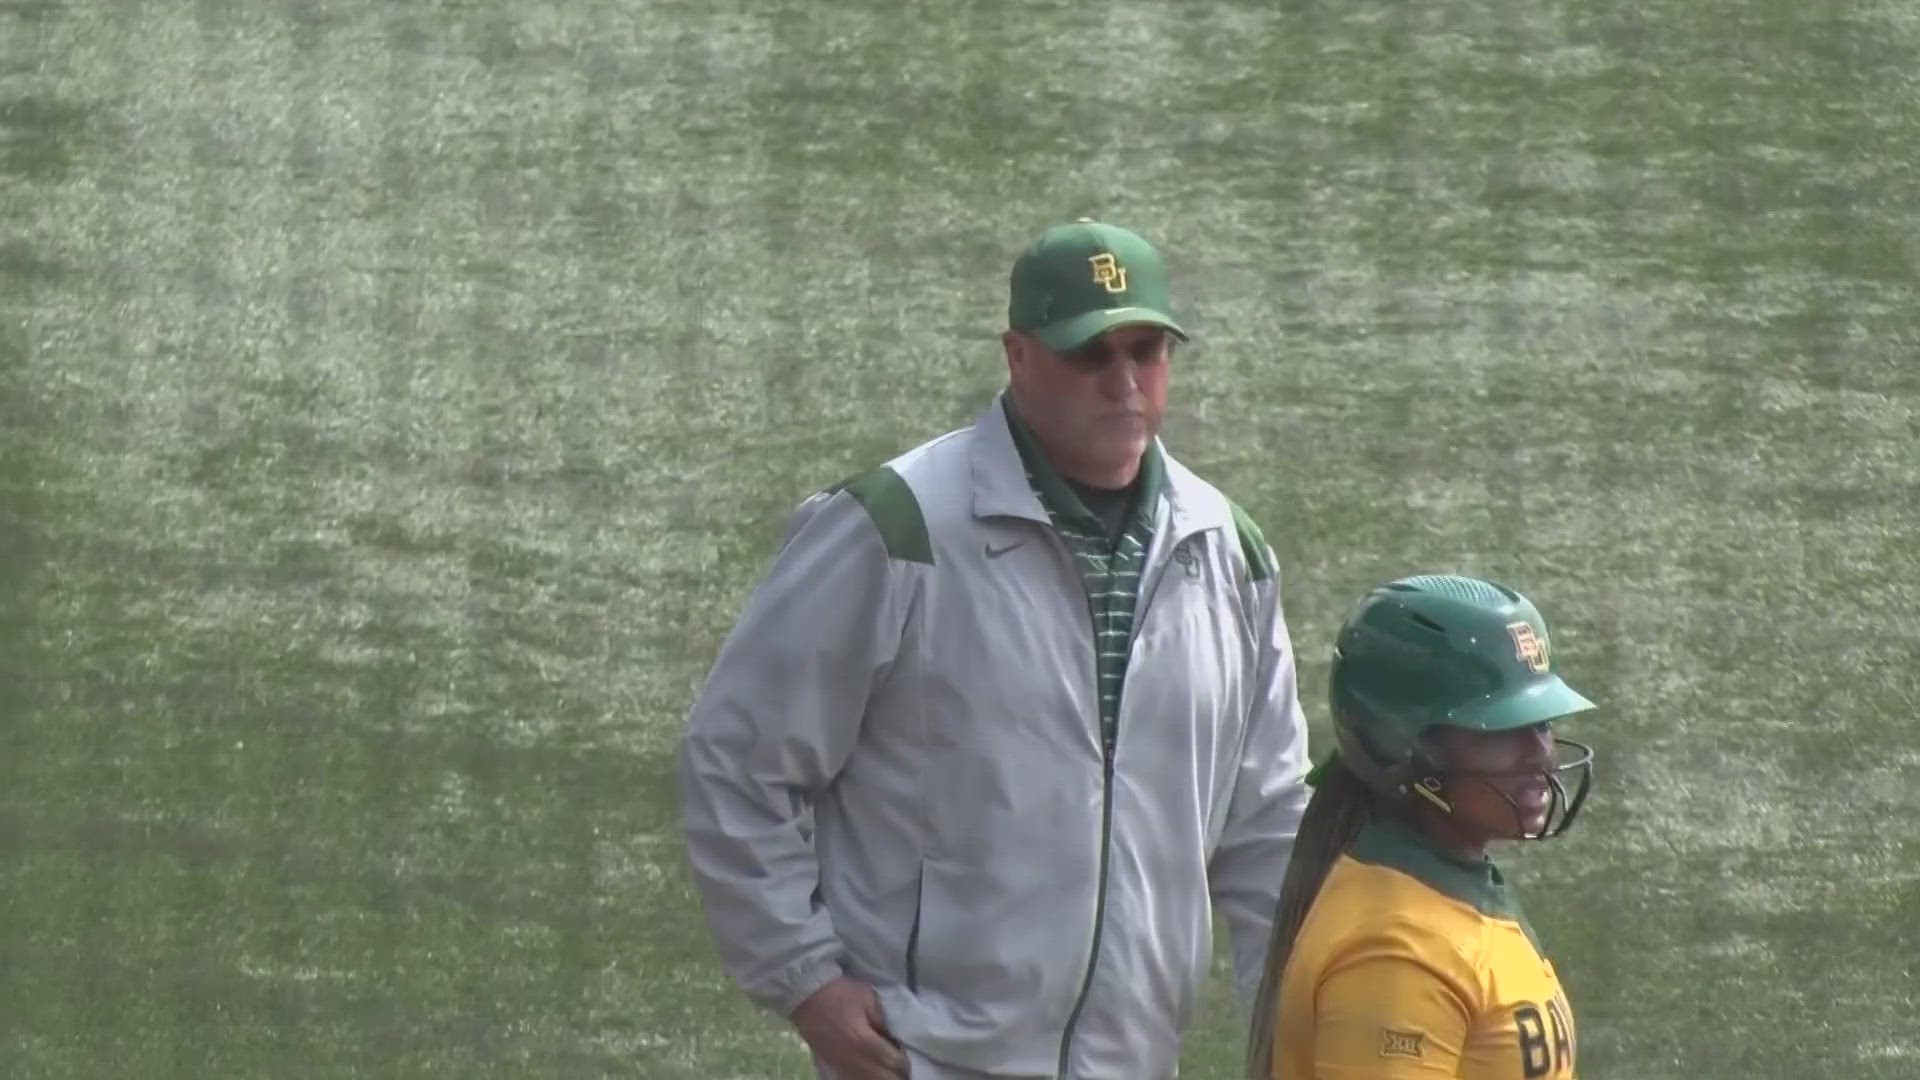 A 5-0 win in its non-conference finale gave longtime Baylor coach Glenn Moore his 1000th career win.